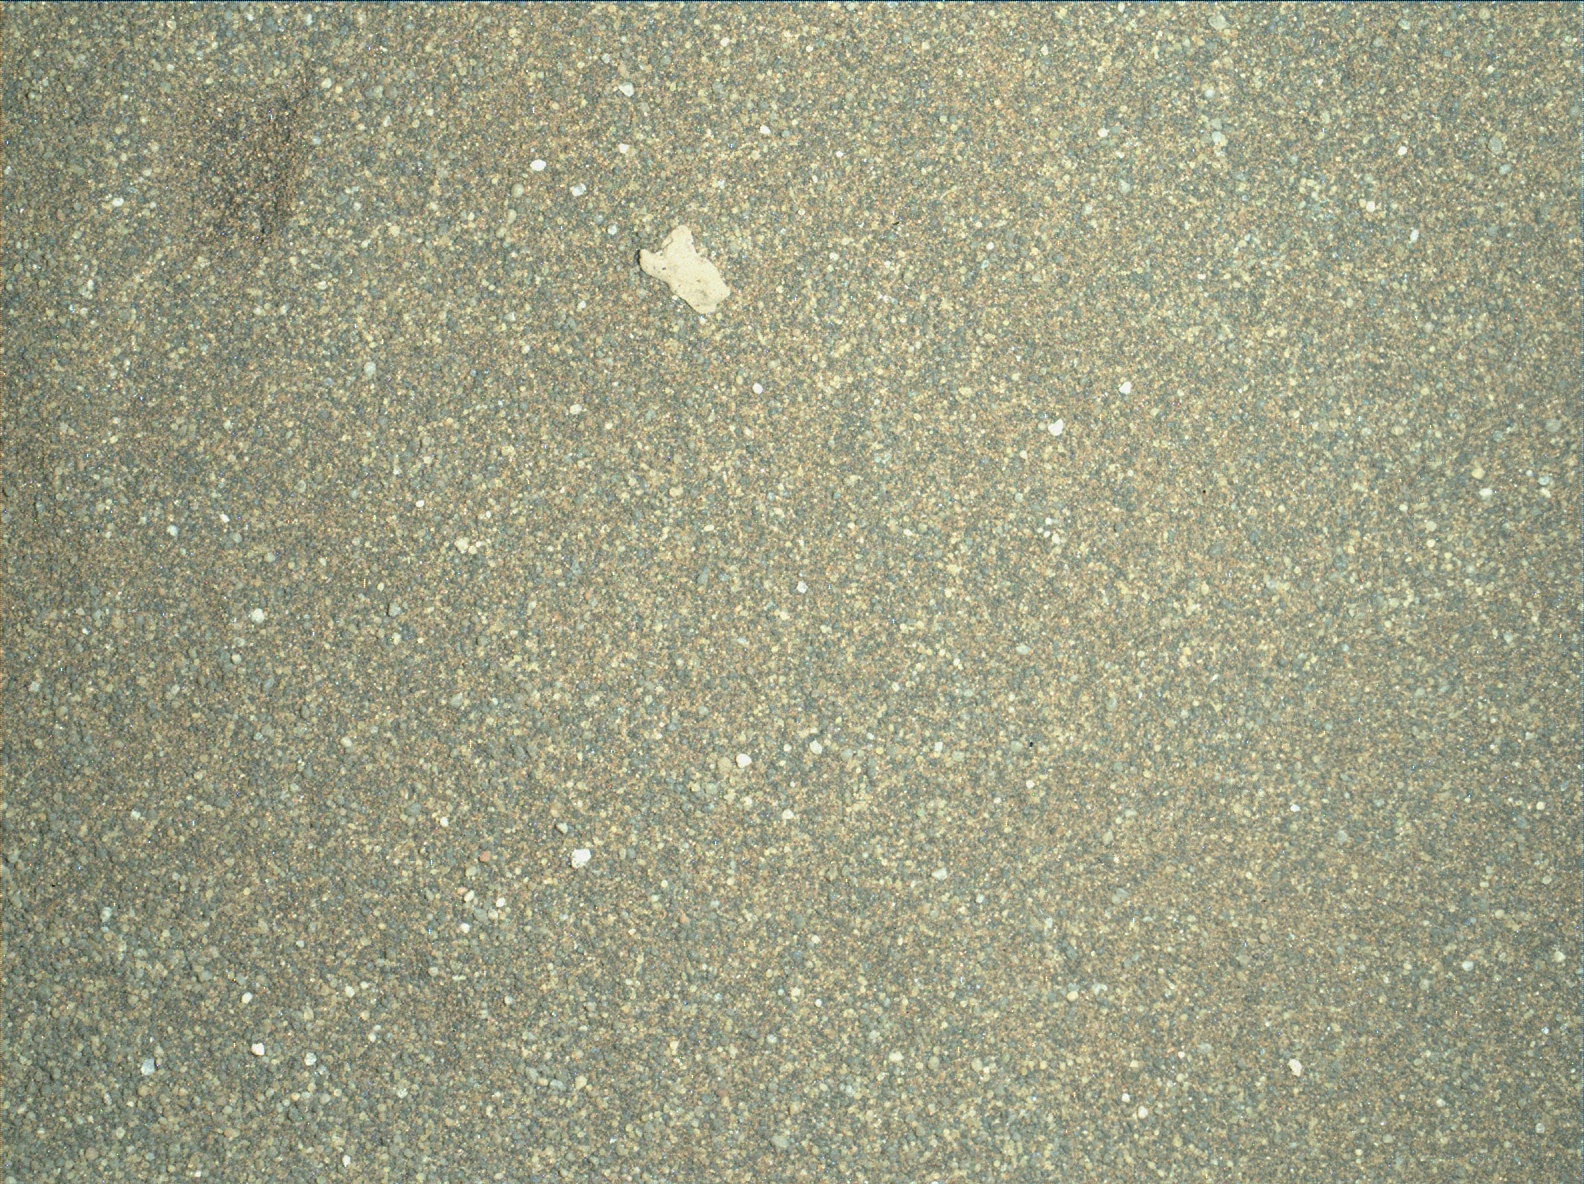 Nasa's Mars rover Curiosity acquired this image using its Mars Hand Lens Imager (MAHLI) on Sol 1184